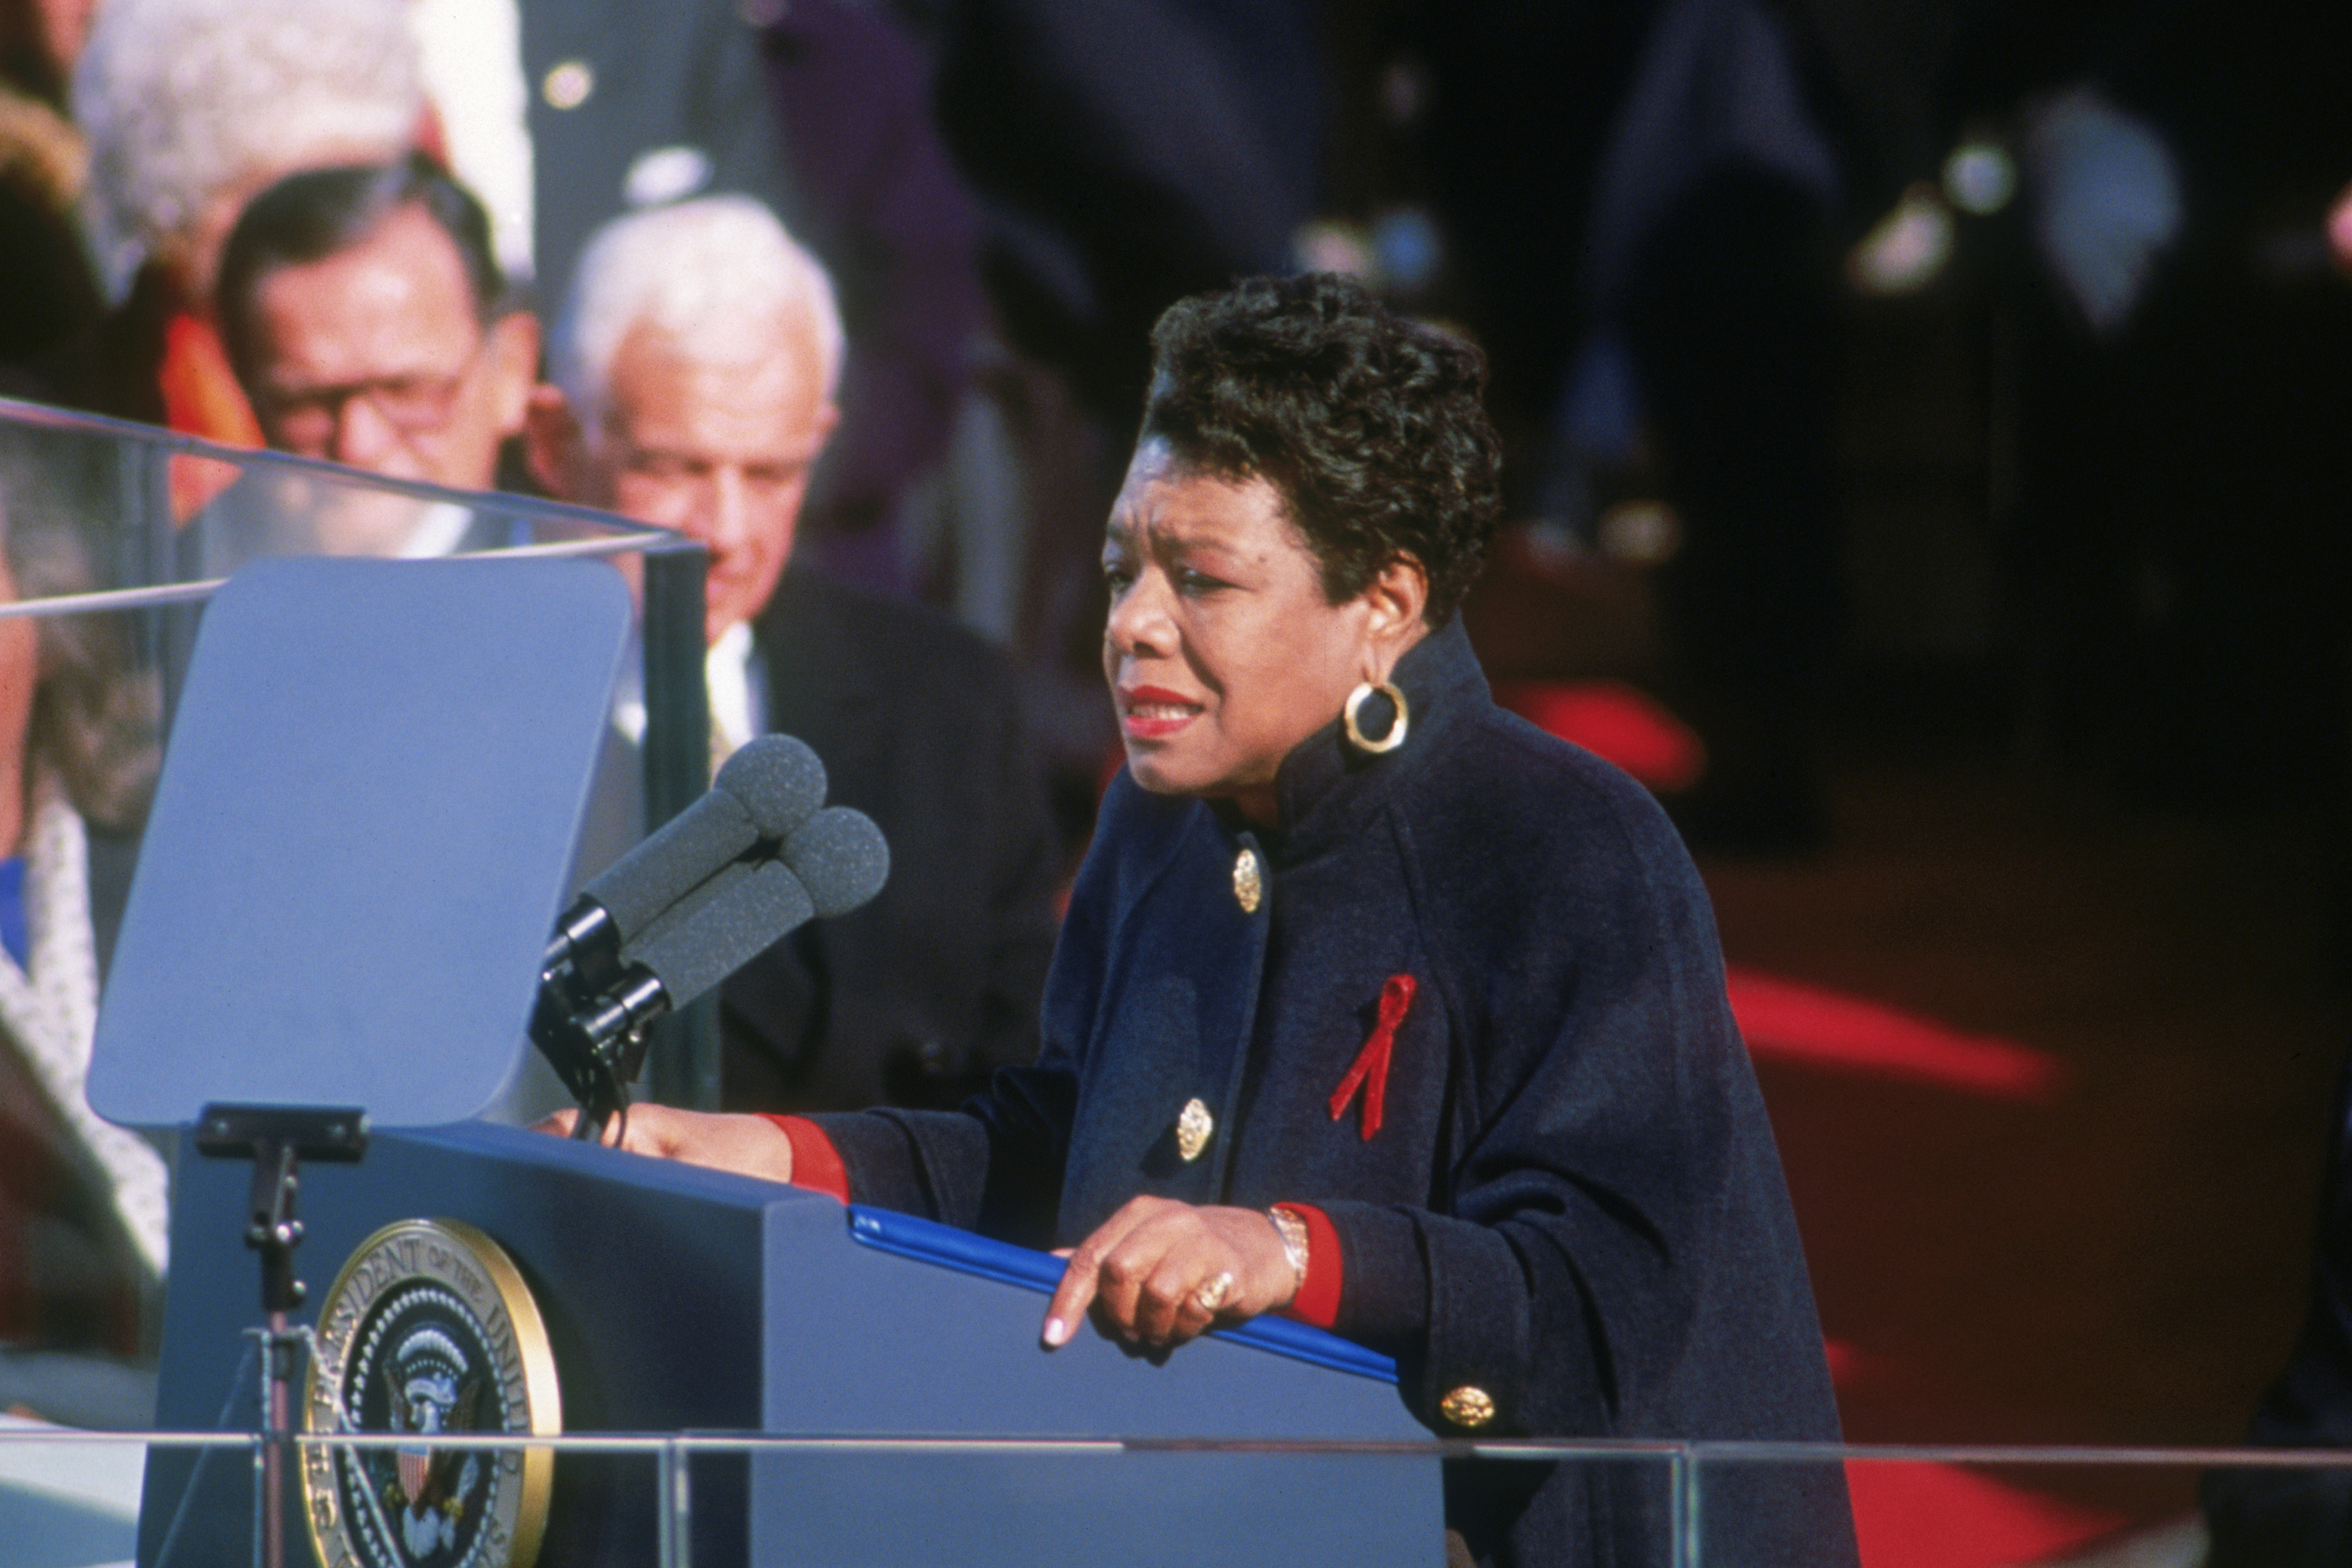 Poet Maya Angelou recites her poem 'On the Pulse of Morning' at the inauguration of President Bill Clinton in Washington D.C., Jan. 20, 1993. (Consolidated News Pictures/Getty Images)